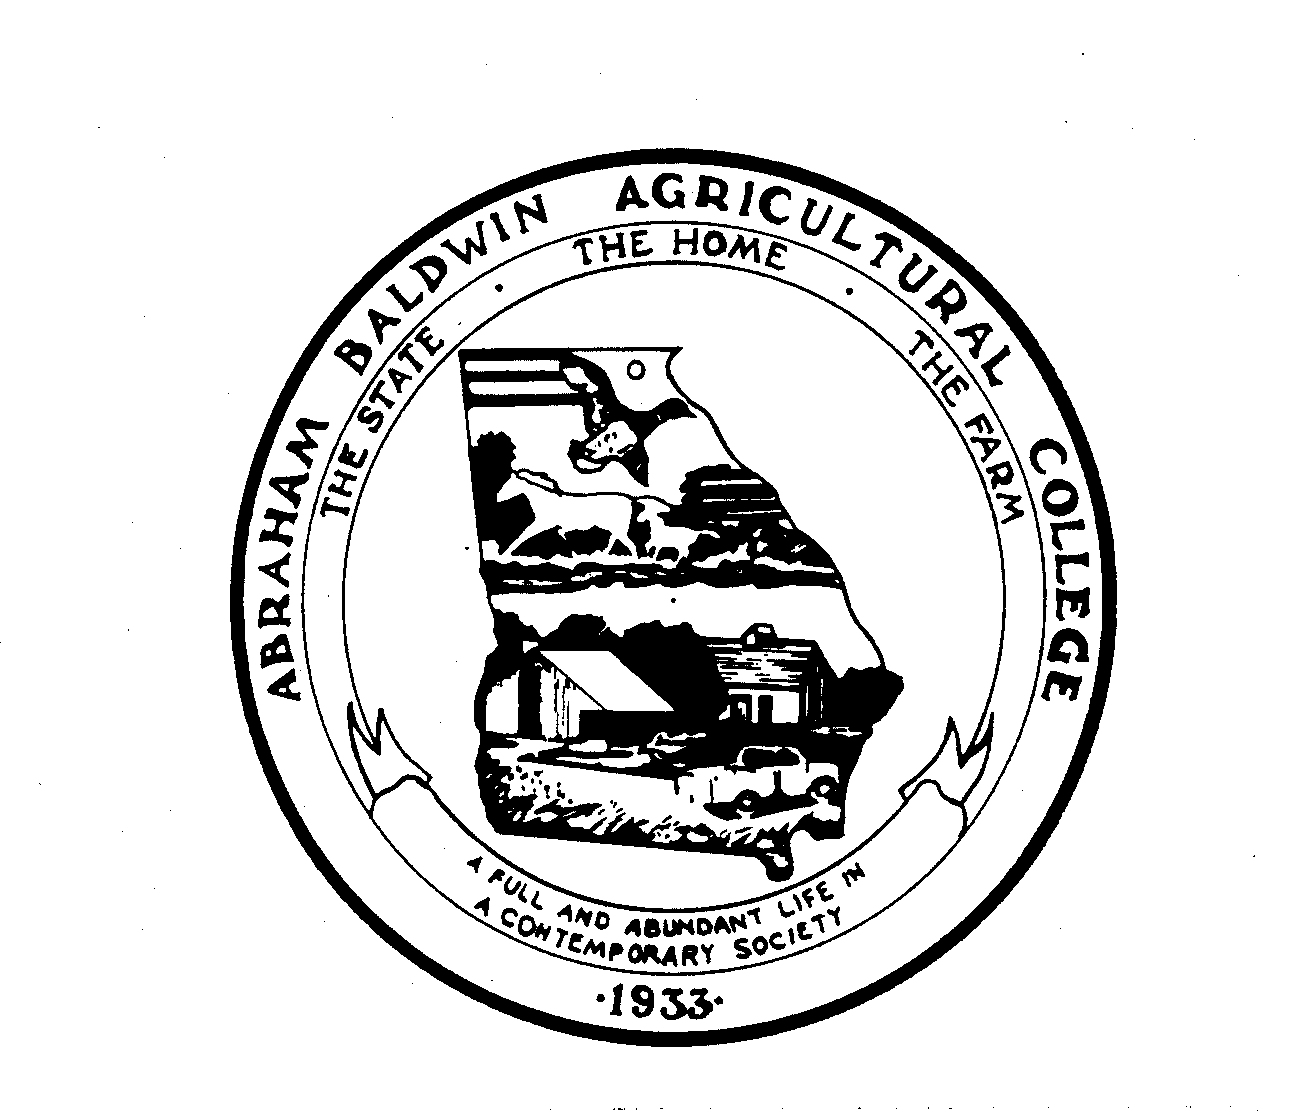  ABRAHAM BALDWIN AGRICULTURAL COLLEGE 1933